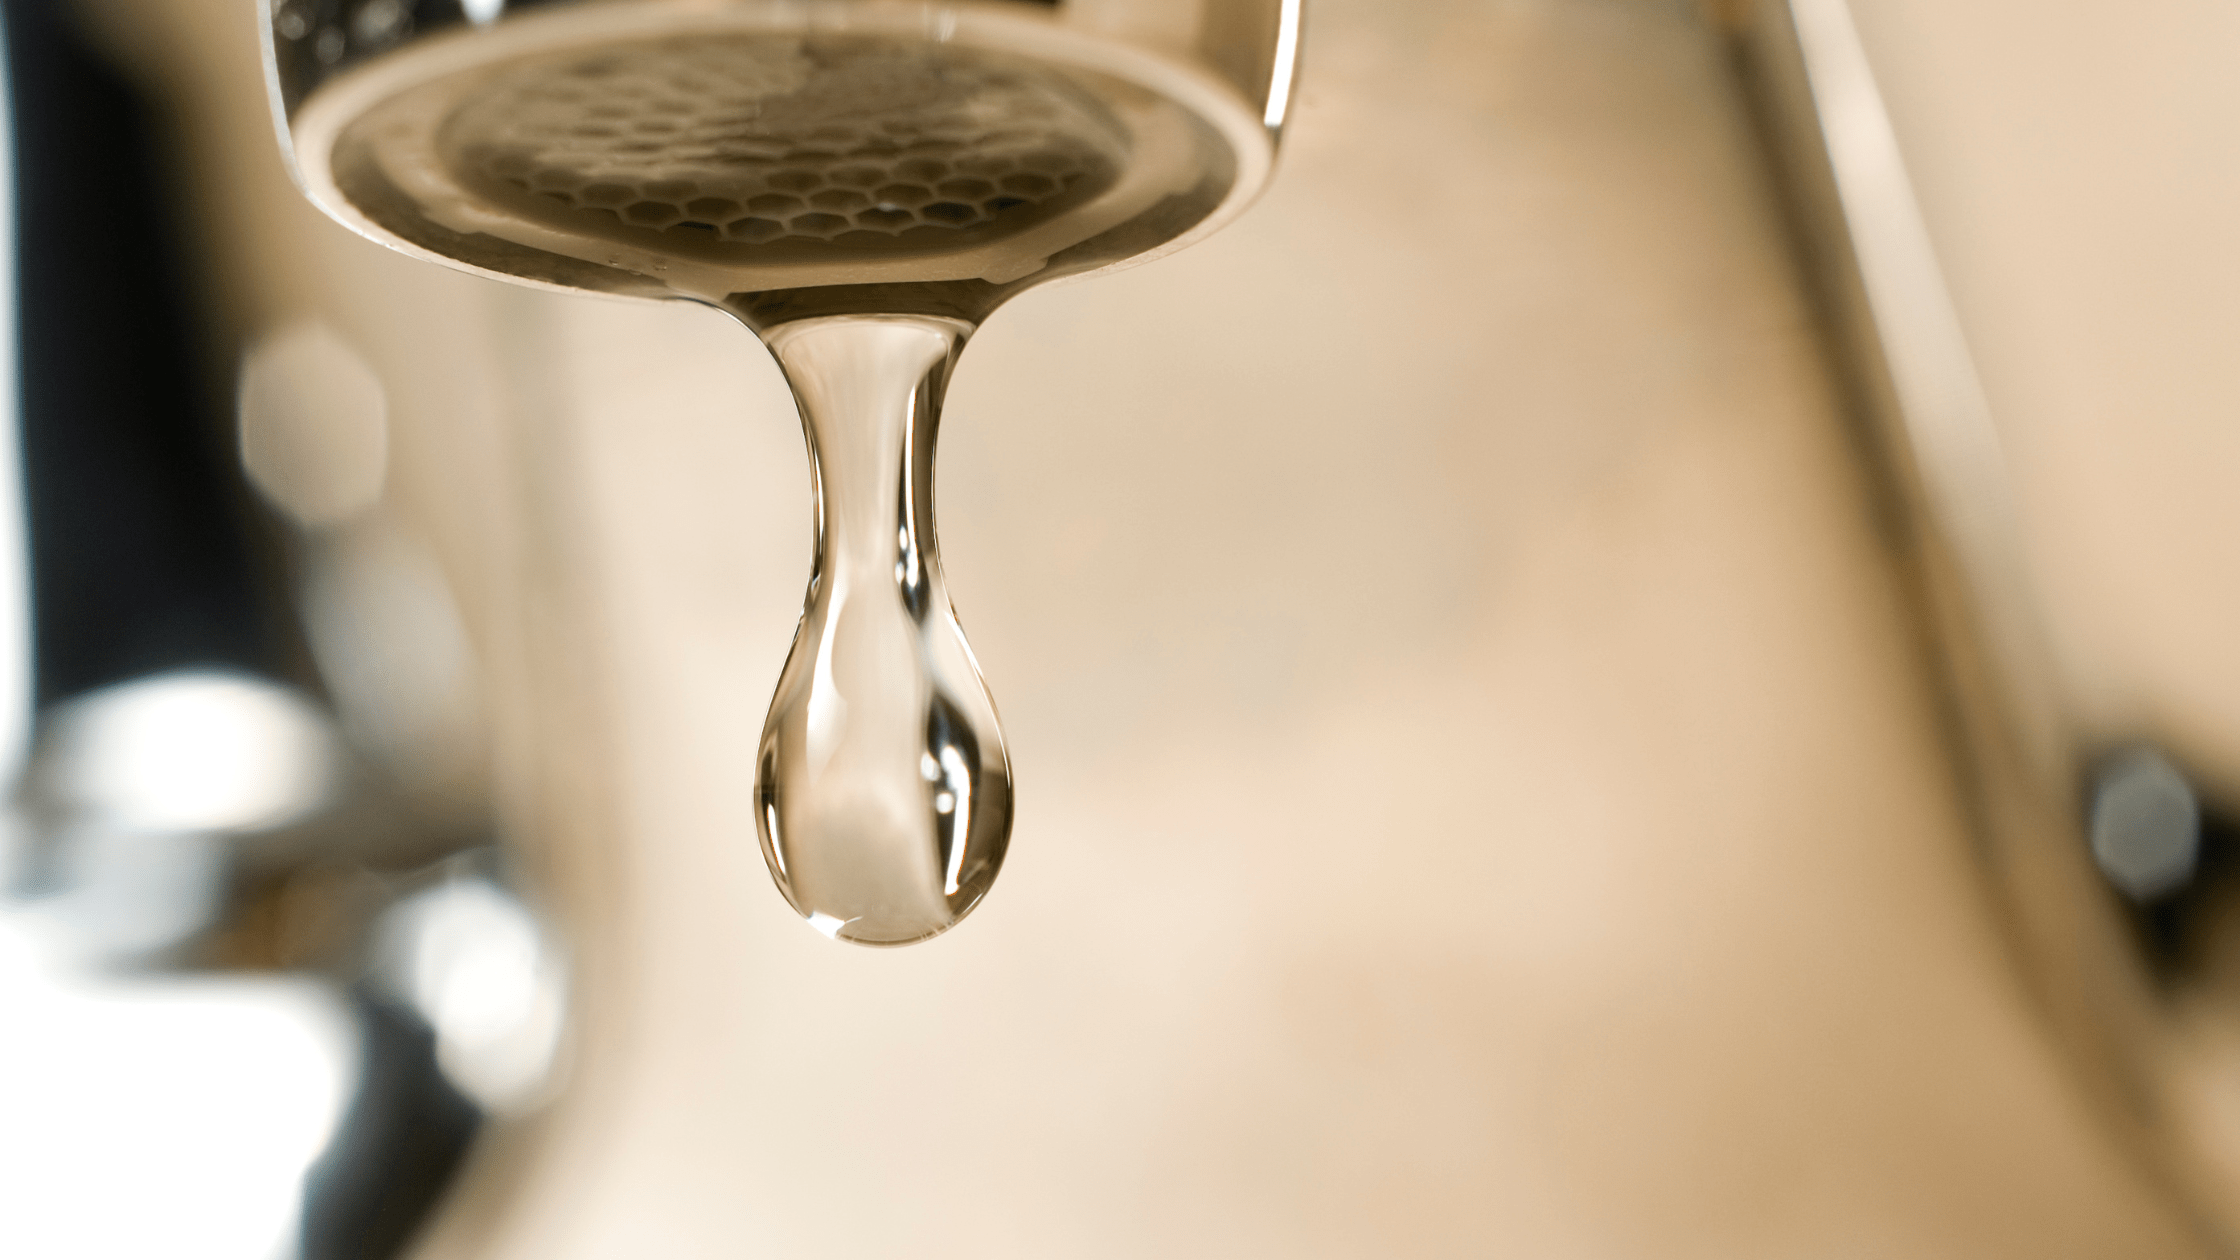 Drips and Drops: Demystifying Common Leak Myths